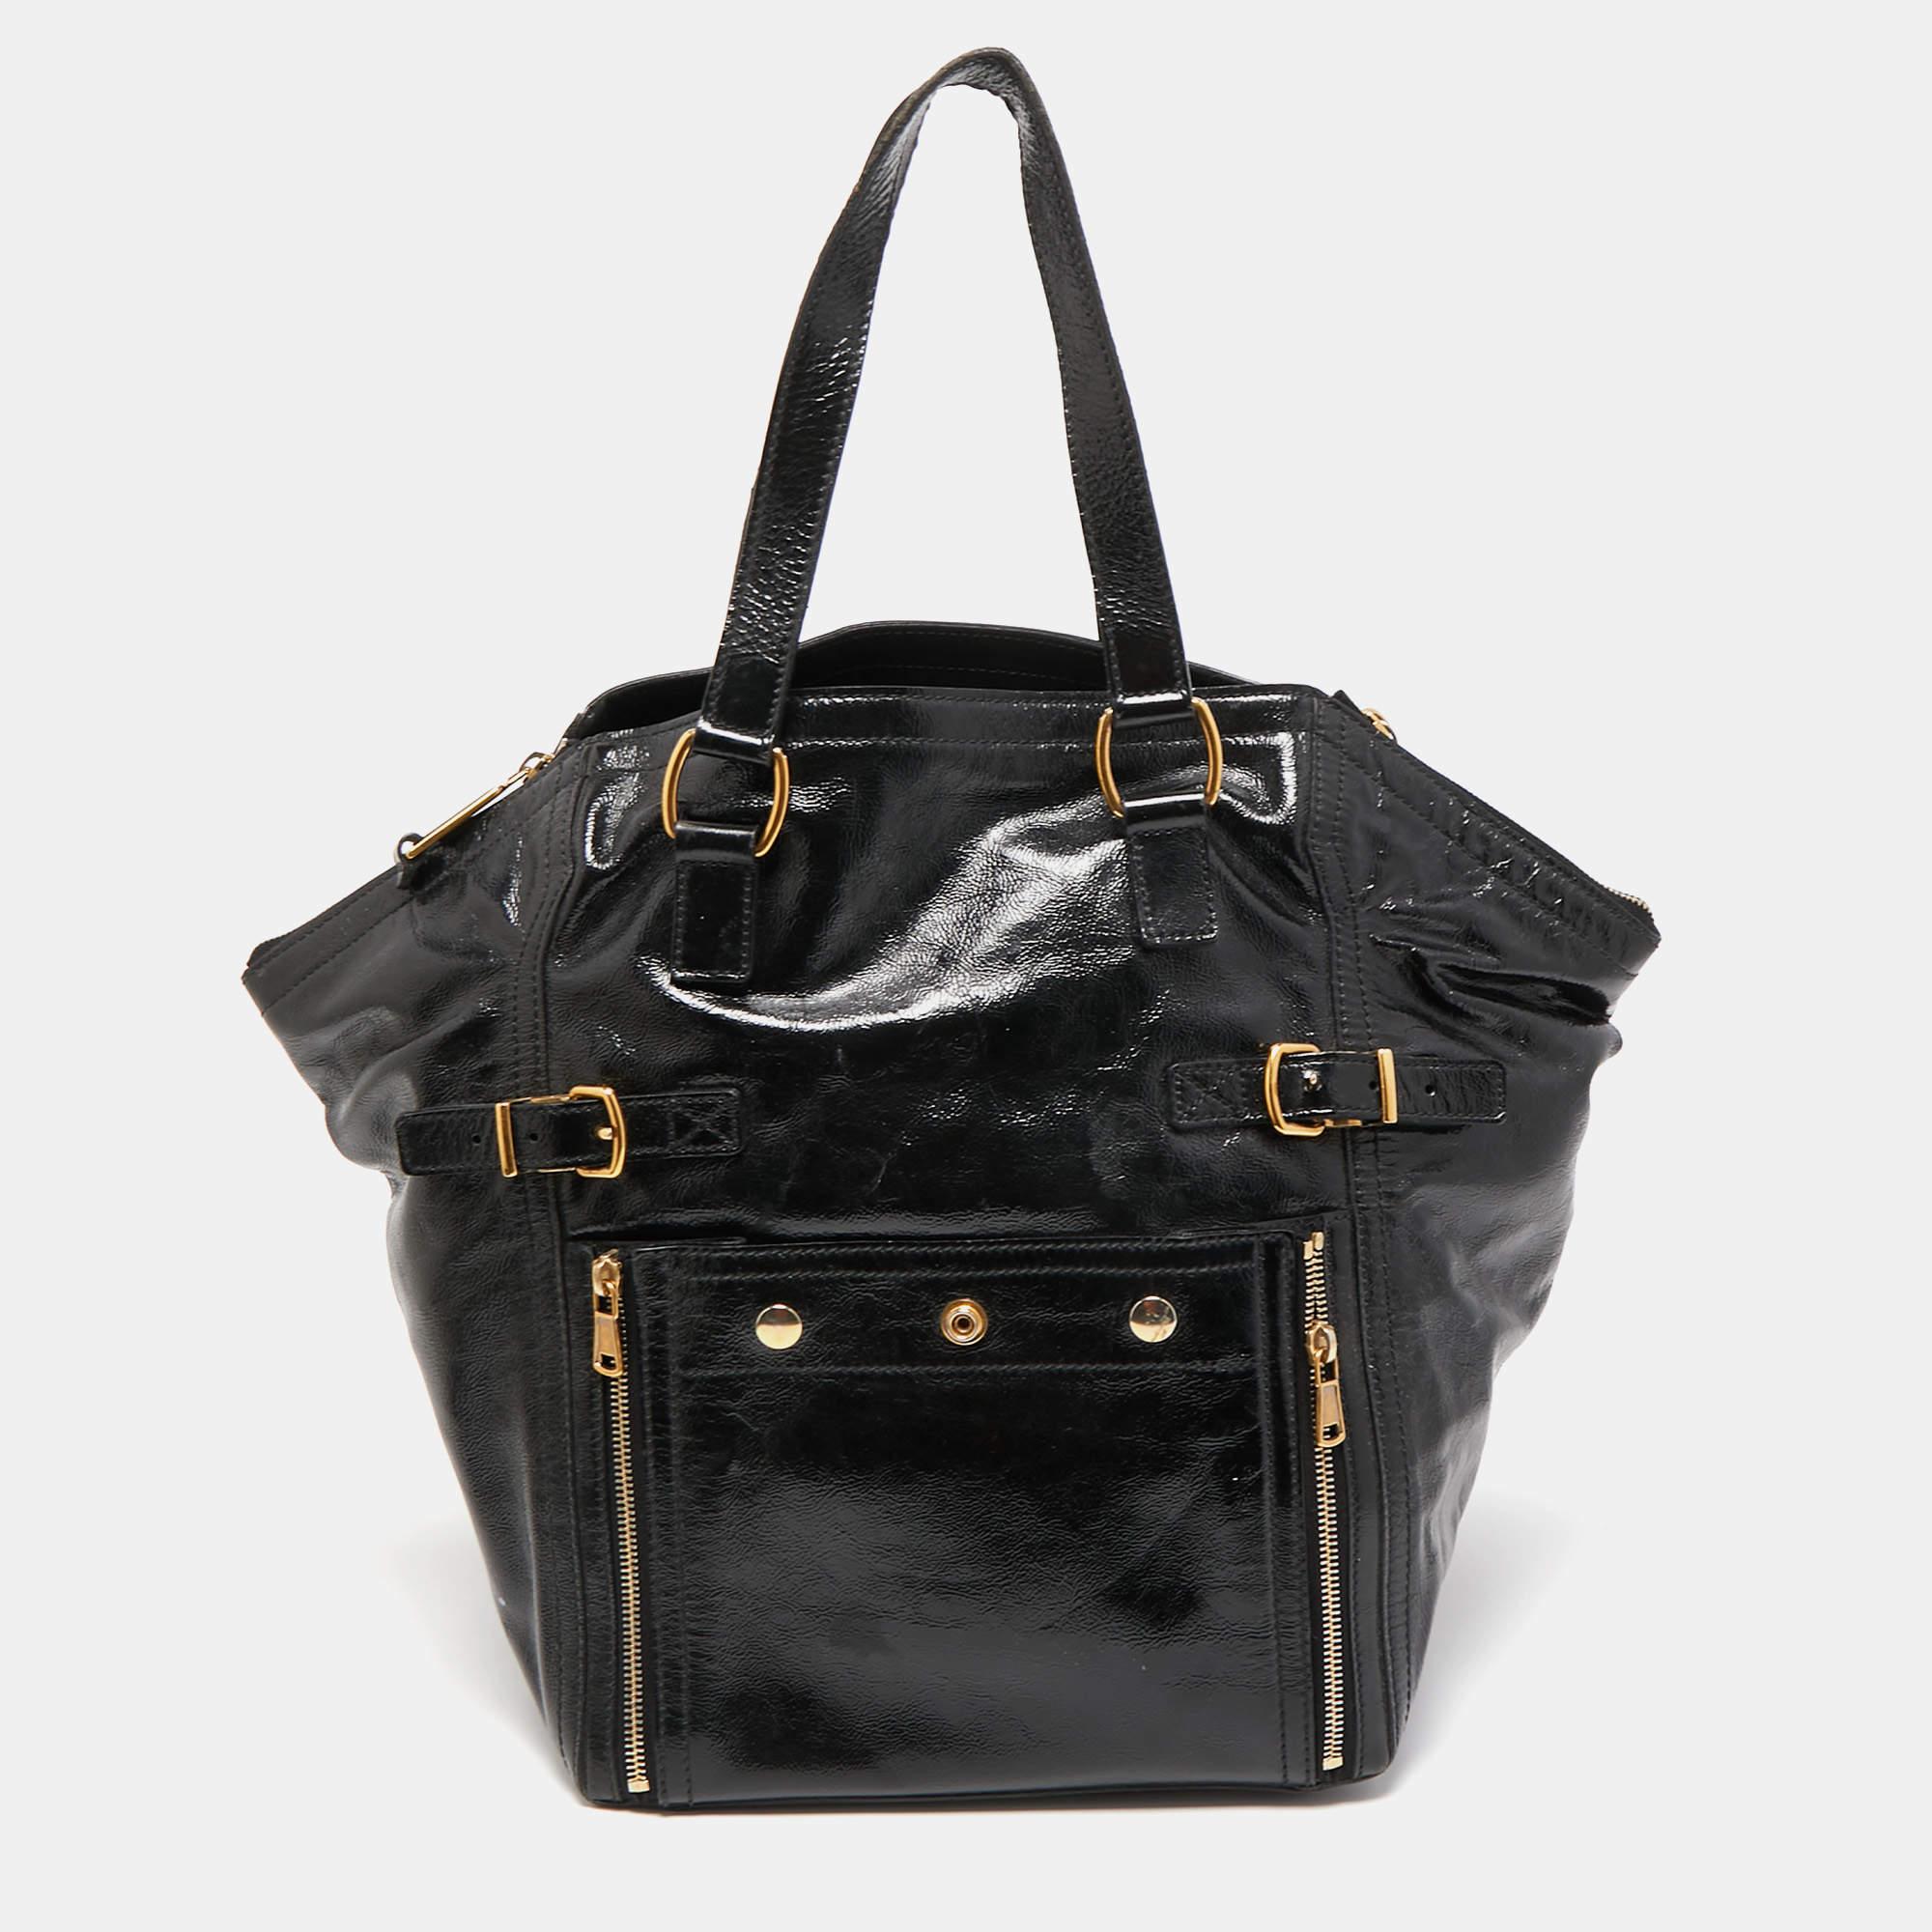 Carry everything you need in style thanks to this YSL black tote. Crafted from the best materials, this is an accessory that promises enduring style and usage.

